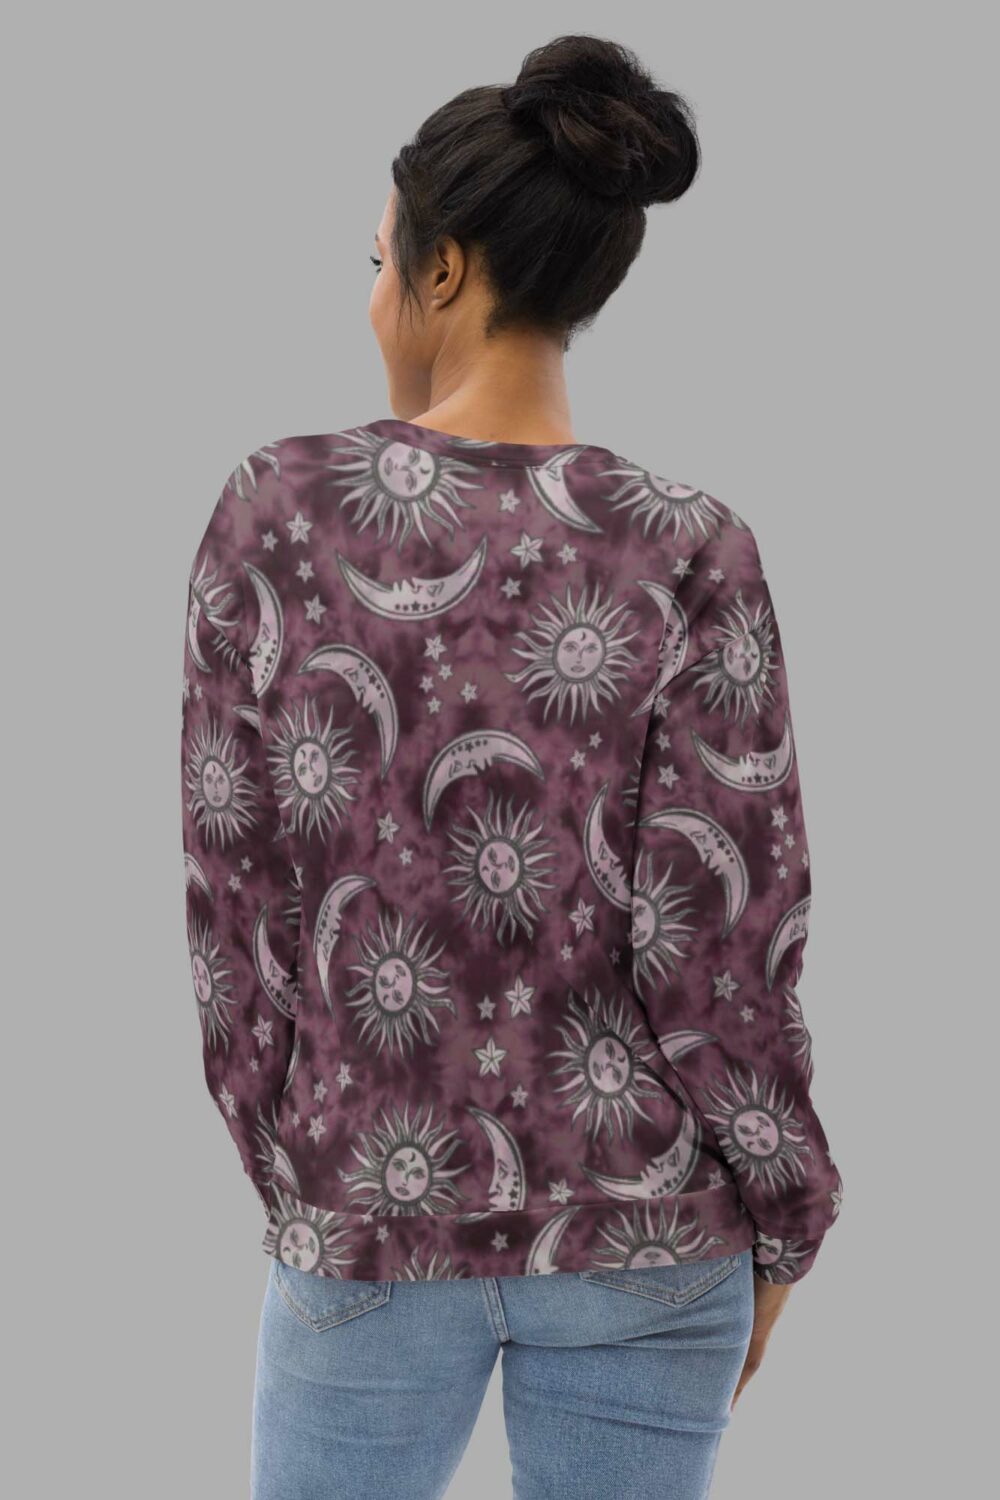 cosmic drifters pink suns moons print sweater back2